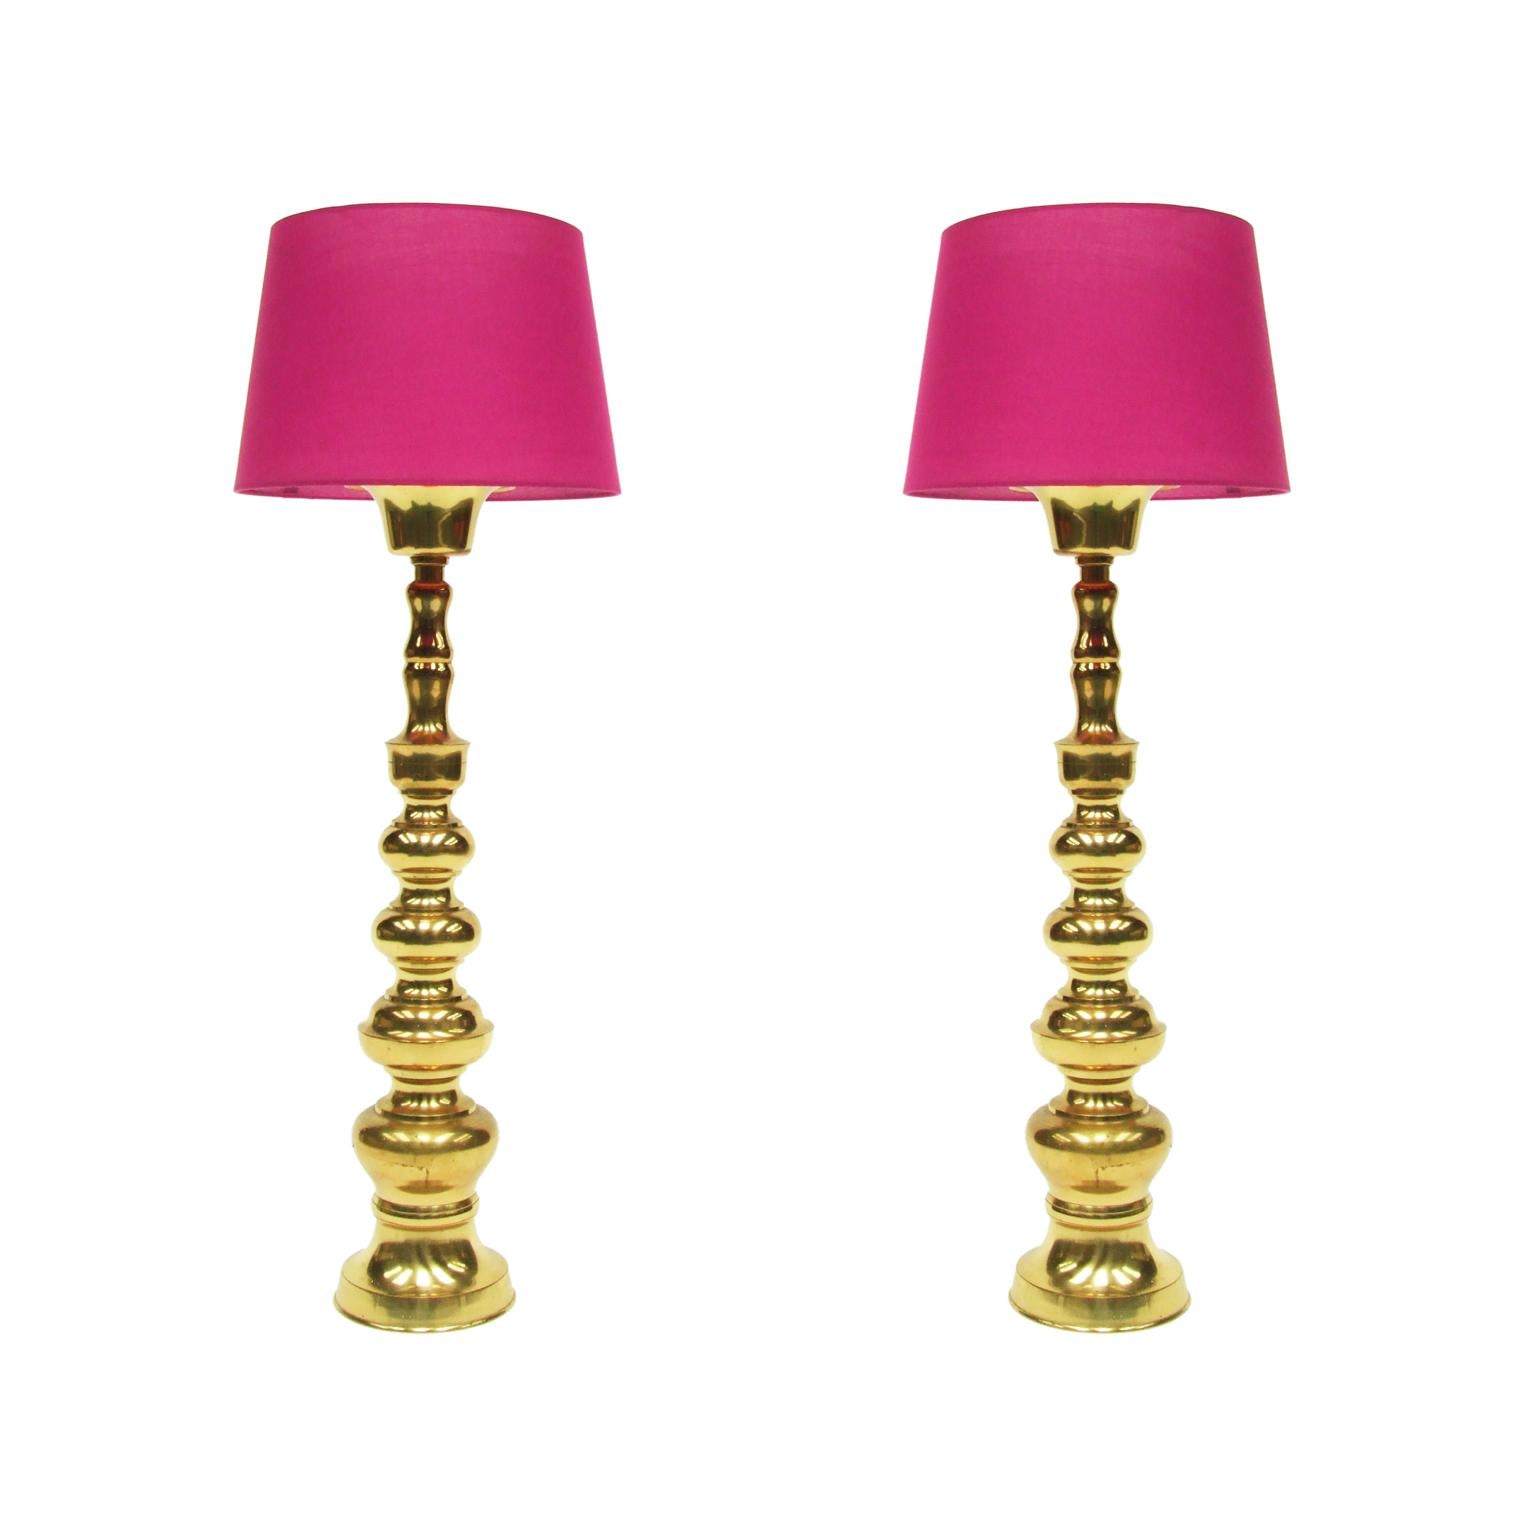 Pair of 1970s floor lamps designed and manufactured in the USA.
Solid brass bases with magenta cotton shades.

Single light fitting.

With the shades the lamps measure: H 107 cm x L 38 cm x W 38 cm.

Without the shade the lamps measure: H 87